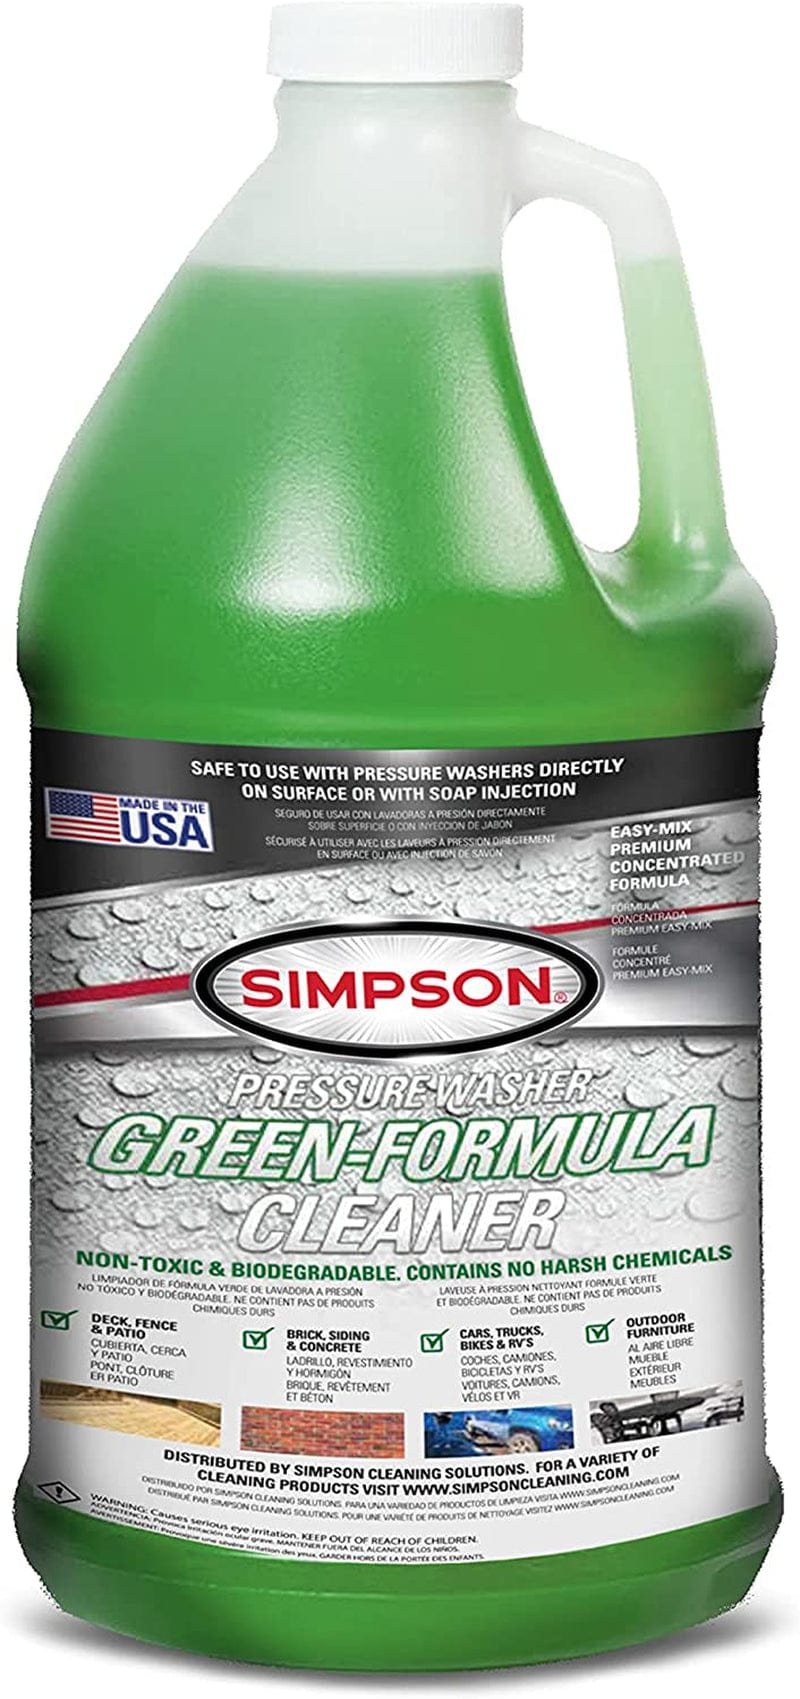 SIMPSON Cleaning 88282 Heavy Duty Cleaner, Concentrated Soap Solution for Pressure Washers and Spray Bottles, Use on Concrete, Vinyl Siding, Appliances, Windows, Cars, Fences, Decks, Purple, 1 Gallon Home & Garden > Household Supplies > Household Cleaning Supplies Simpson Natural  